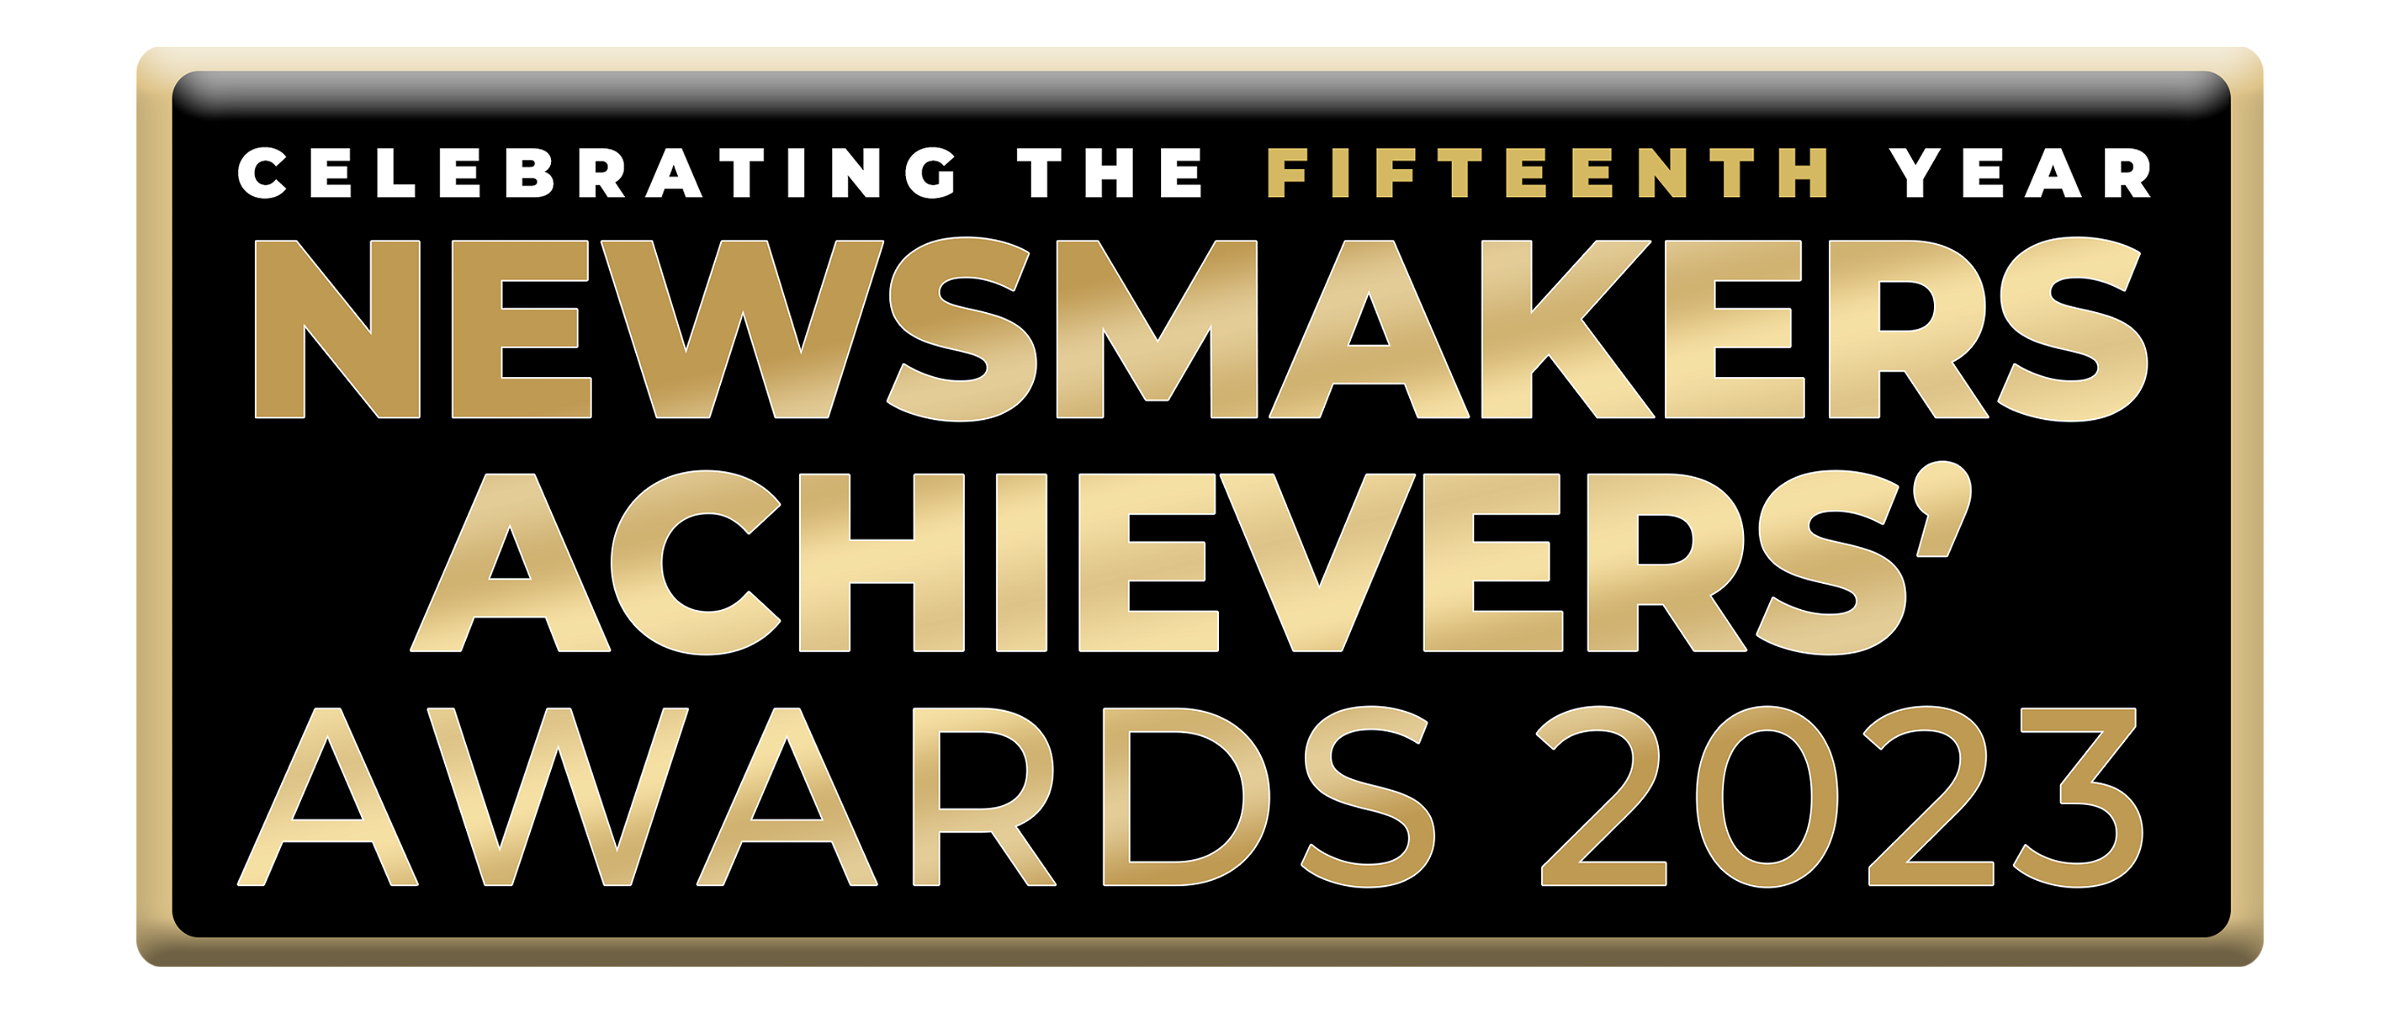 Newsmakers Achievers Awards 2023